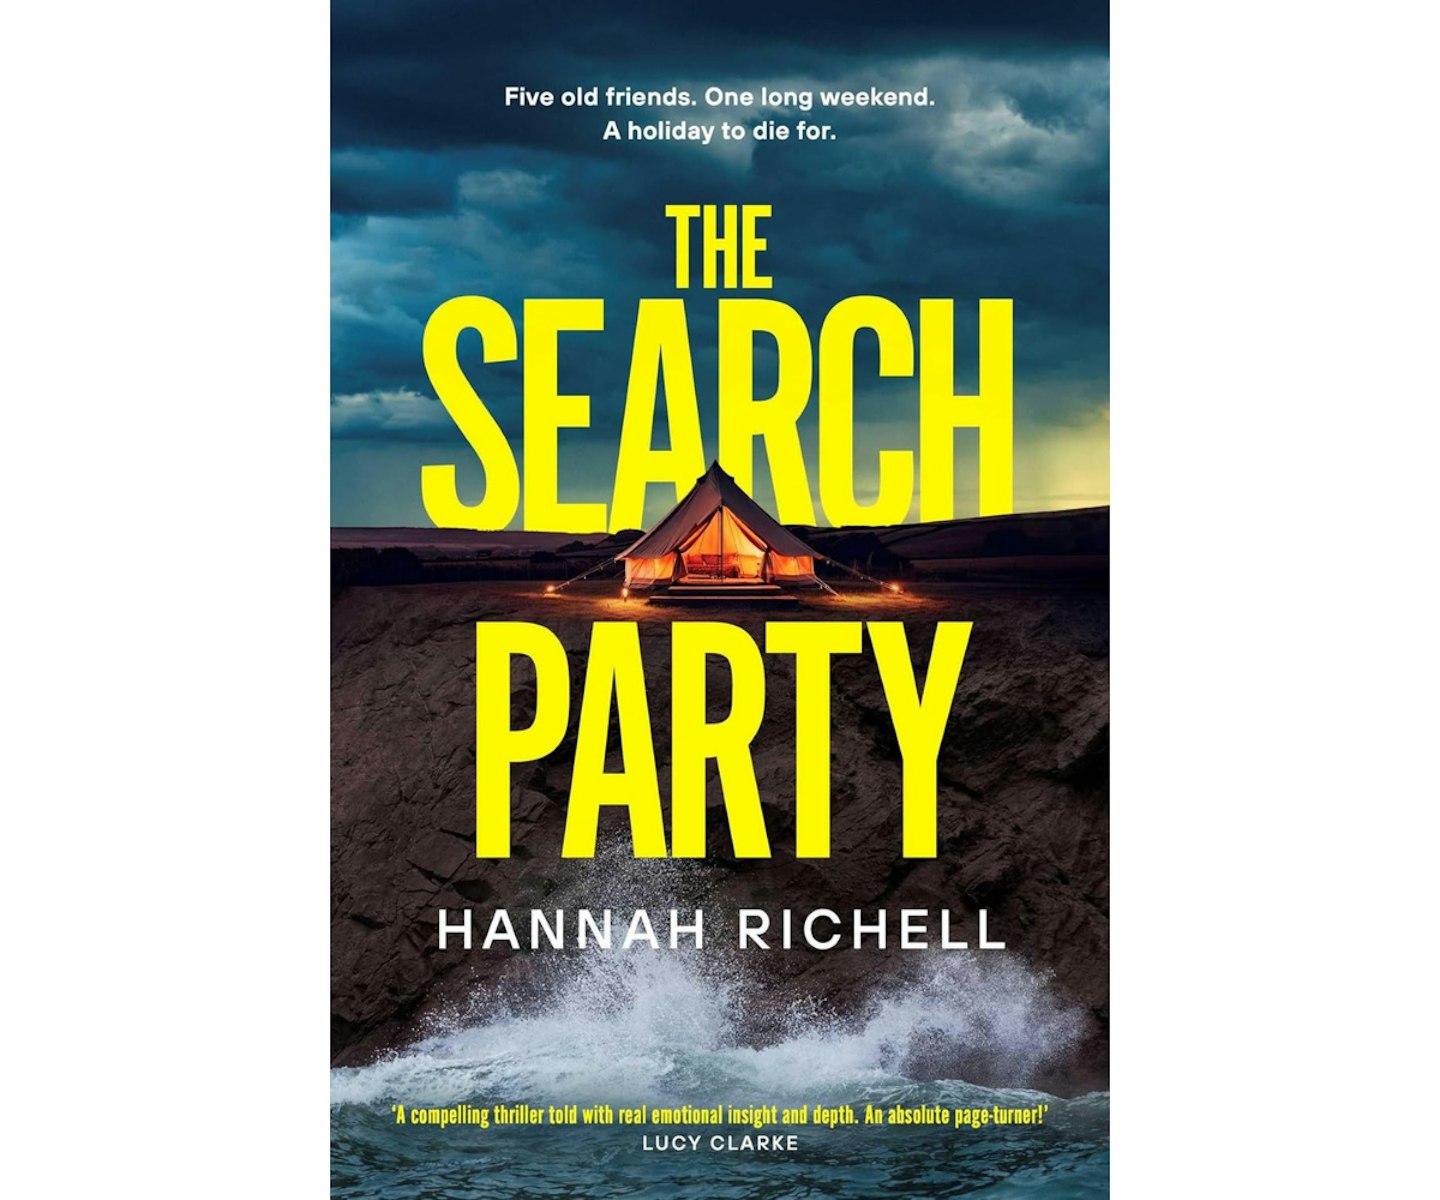 The Search Party by Hannah Richell